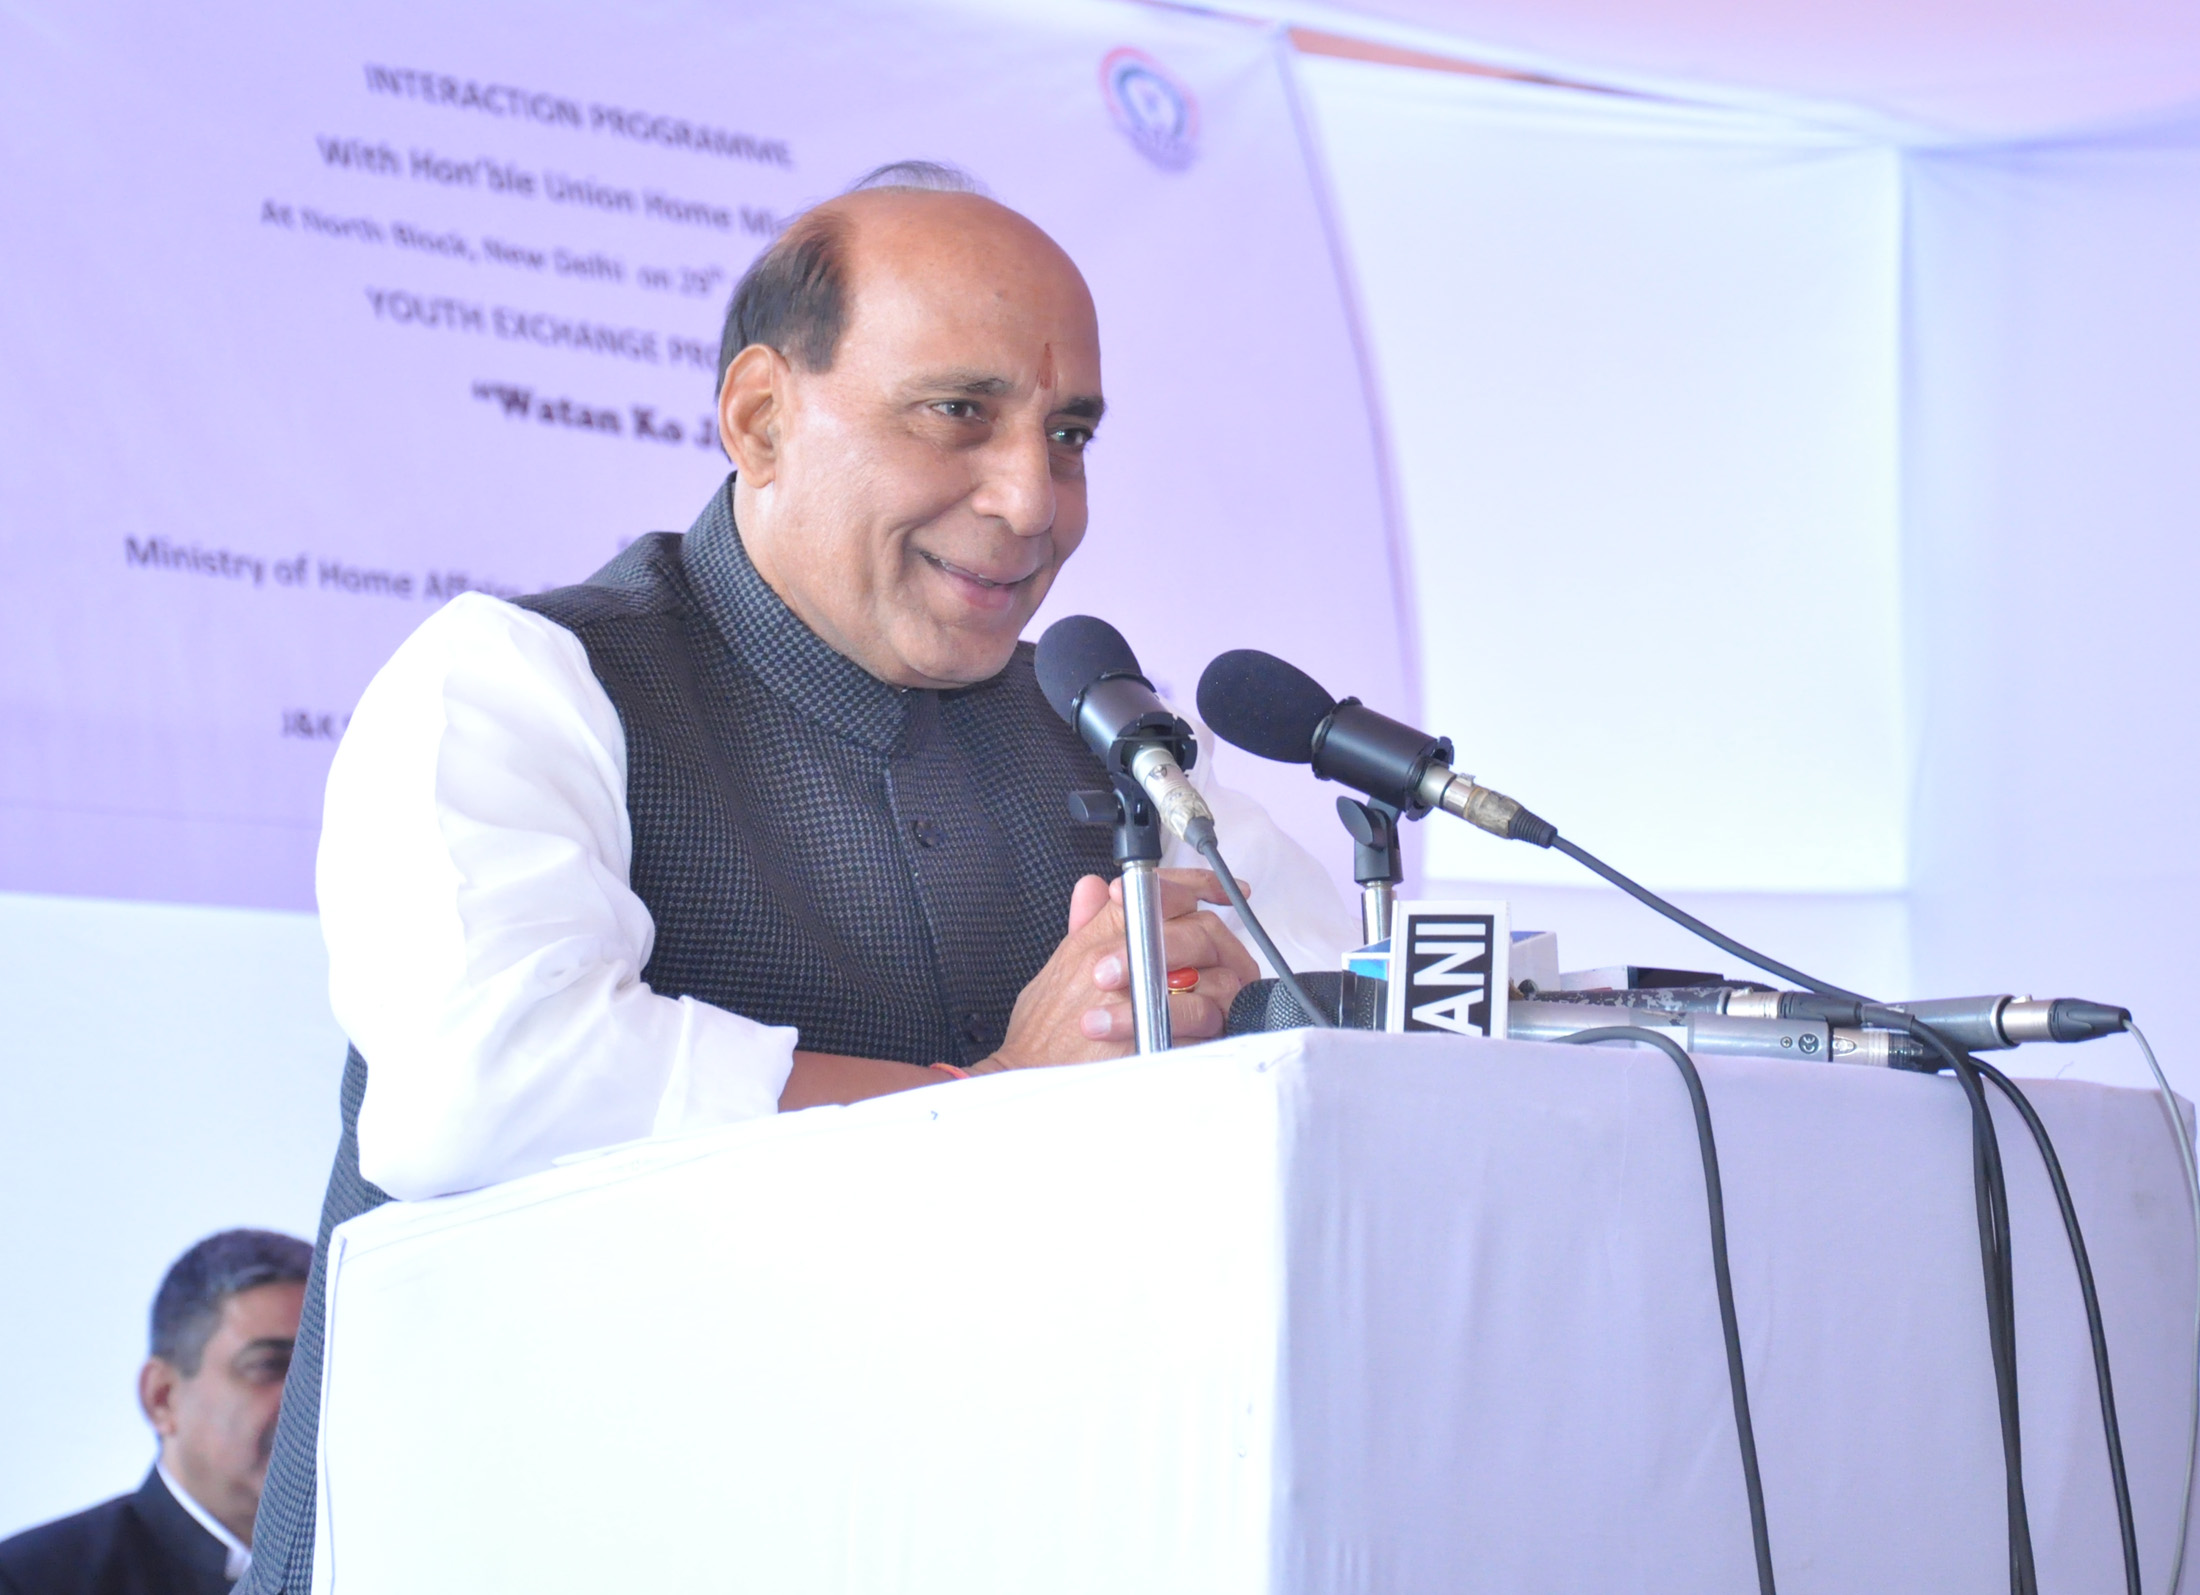 The Union Home Minister, Shri Rajnath Singh addressing the youth from the state of Jammu and Kashmir under Wattan Ko Jano initiative of the Ministry of Home Affairs, in New Delhi on December 29, 2015.